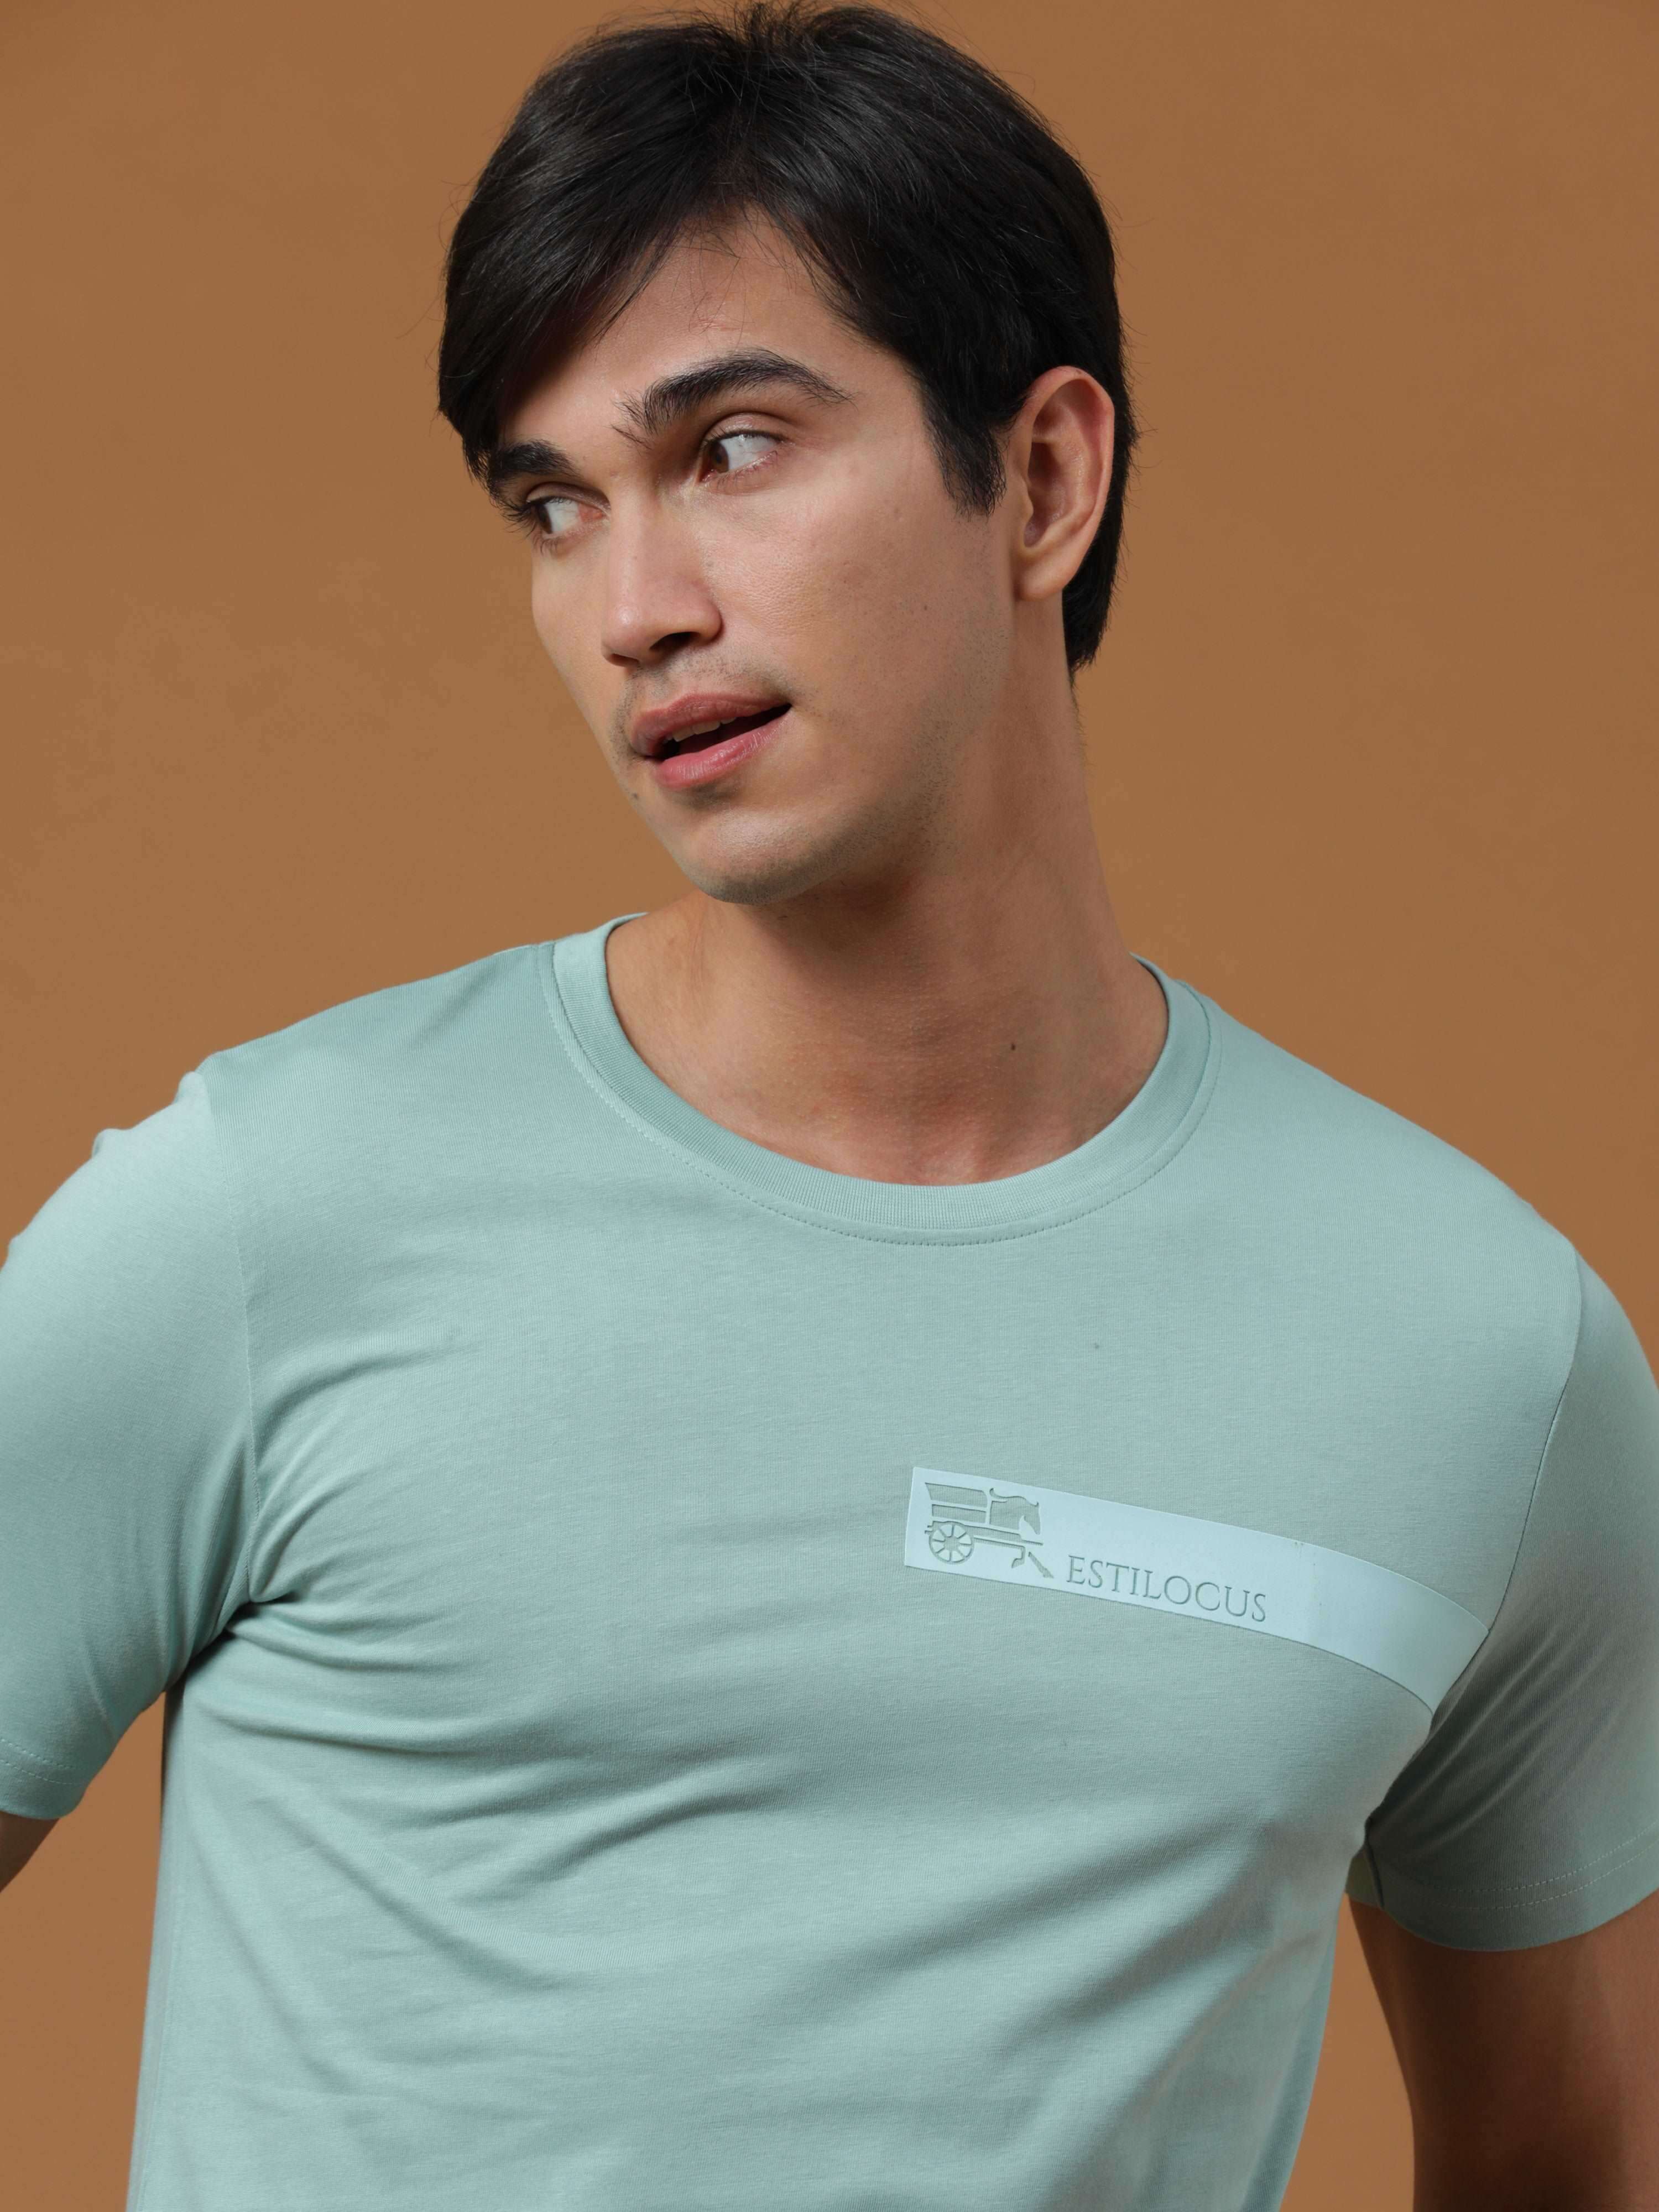 Aqua Hd Printed Logo T Shirt shop online at Estilocus. 100% Cotton Designed and printed on knitted fabric. The fabric is stretchy and lightweight, with a soft skin feel and no wrinkles. Crew neck collar which is smooth on the neck and keeps you comfortabl